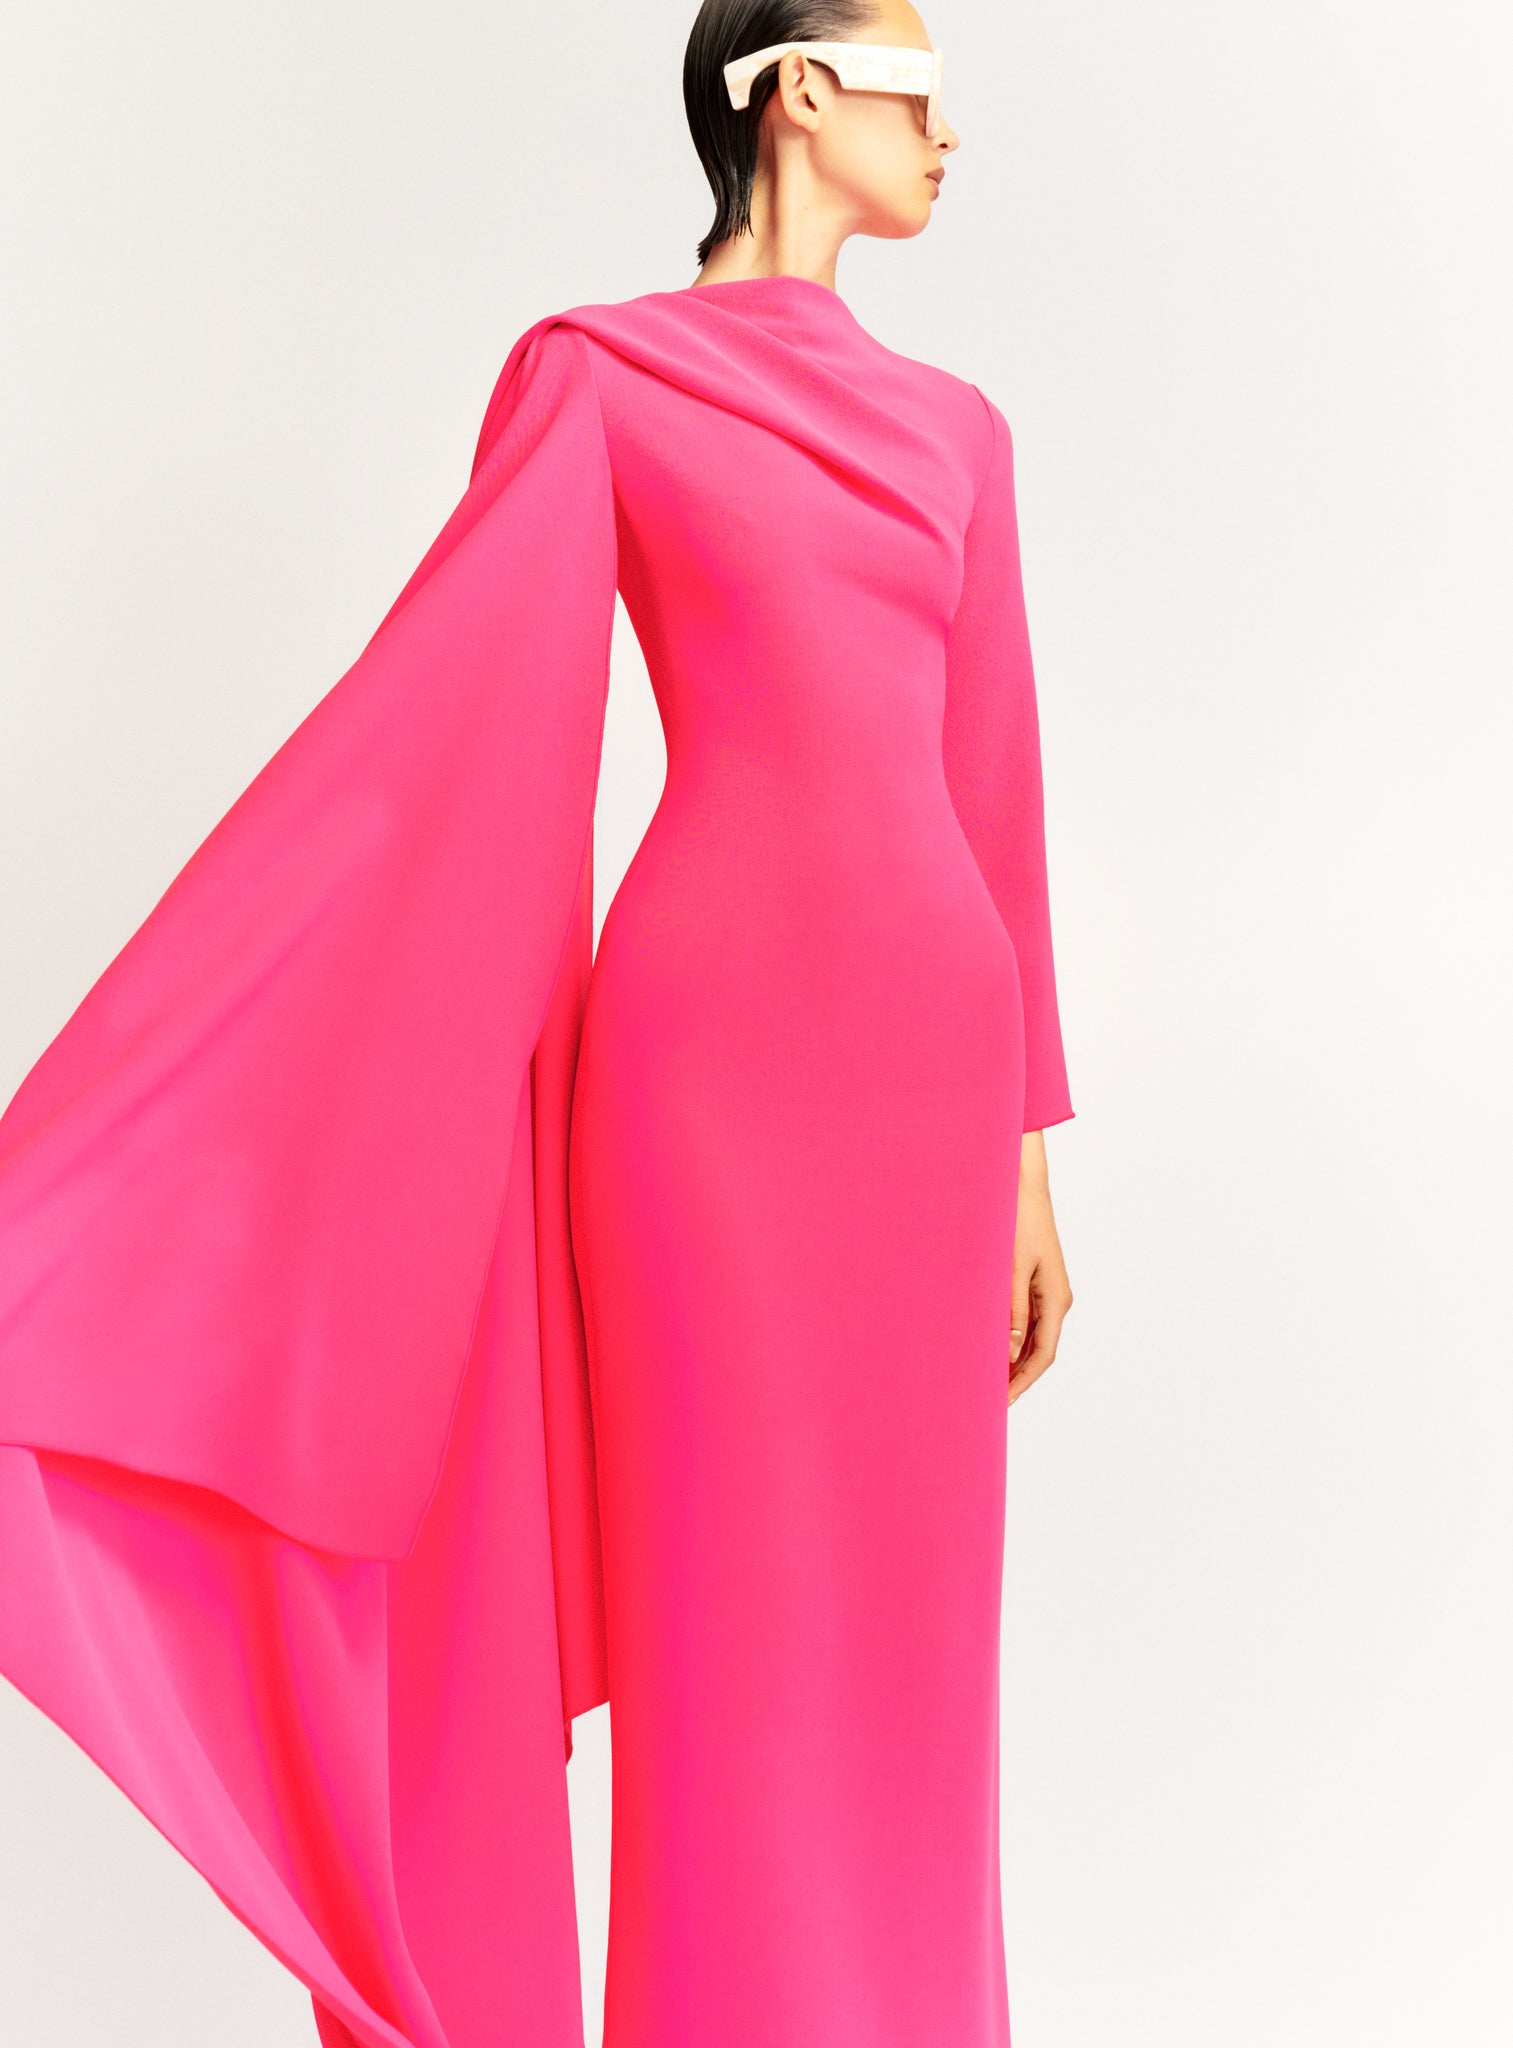 The Lydia Maxi Dress in Ultra Pink